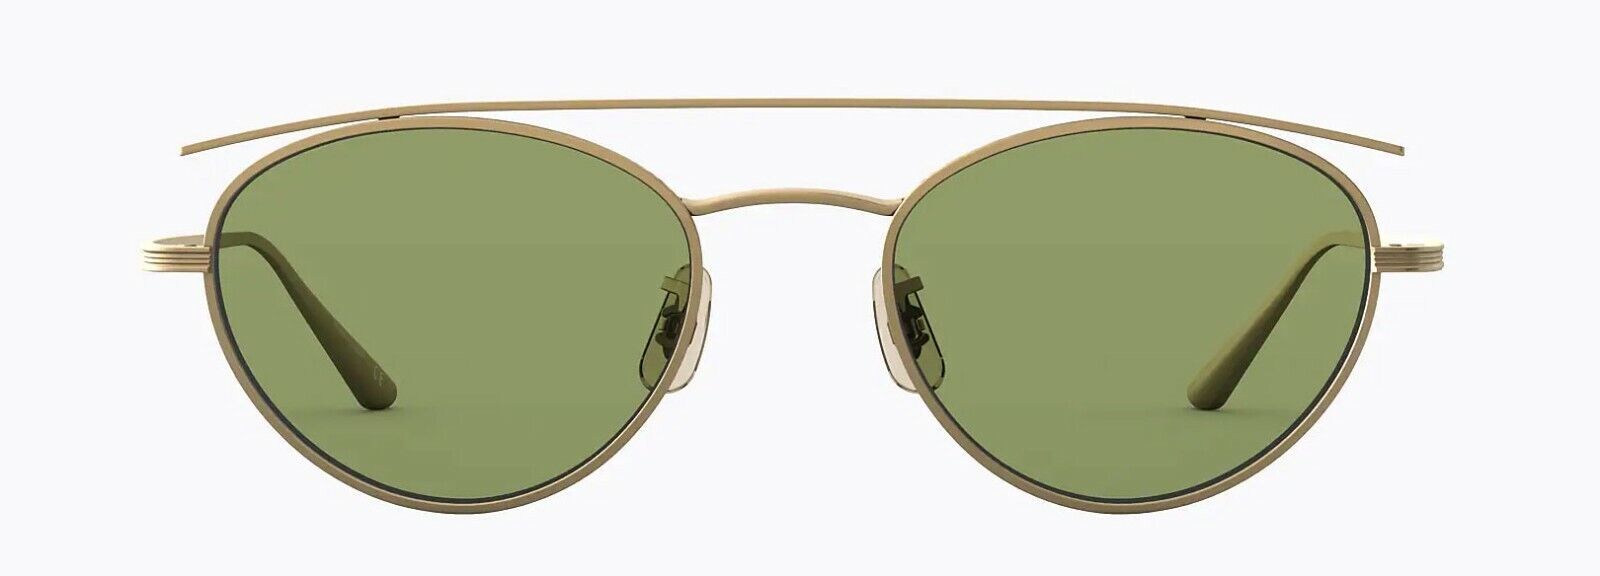 Oliver Peoples Sunglasses 1258ST 528452 The Row Hightree Antique Gold / Green C-827934432642-classypw.com-1